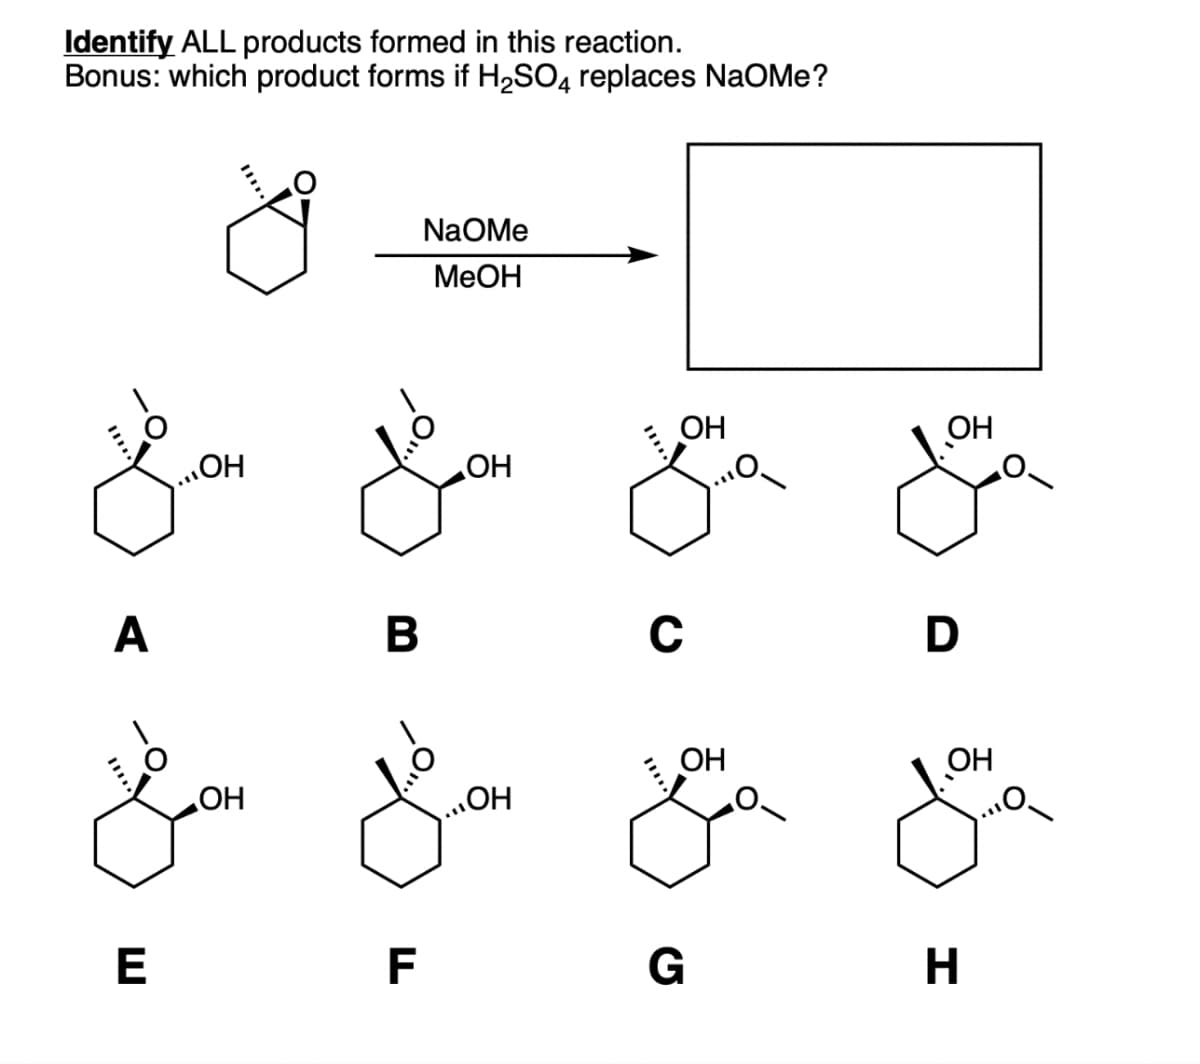 Identify ALL products formed in this reaction.
Bonus: which product forms if H2SO4 replaces NaOMe?
ŏ
NaOMe
MeOH
OH
...OH
مثلا احلى
A
B
OH
La &
OH
C
D
OH
OH
OH
E
F
G H
OH